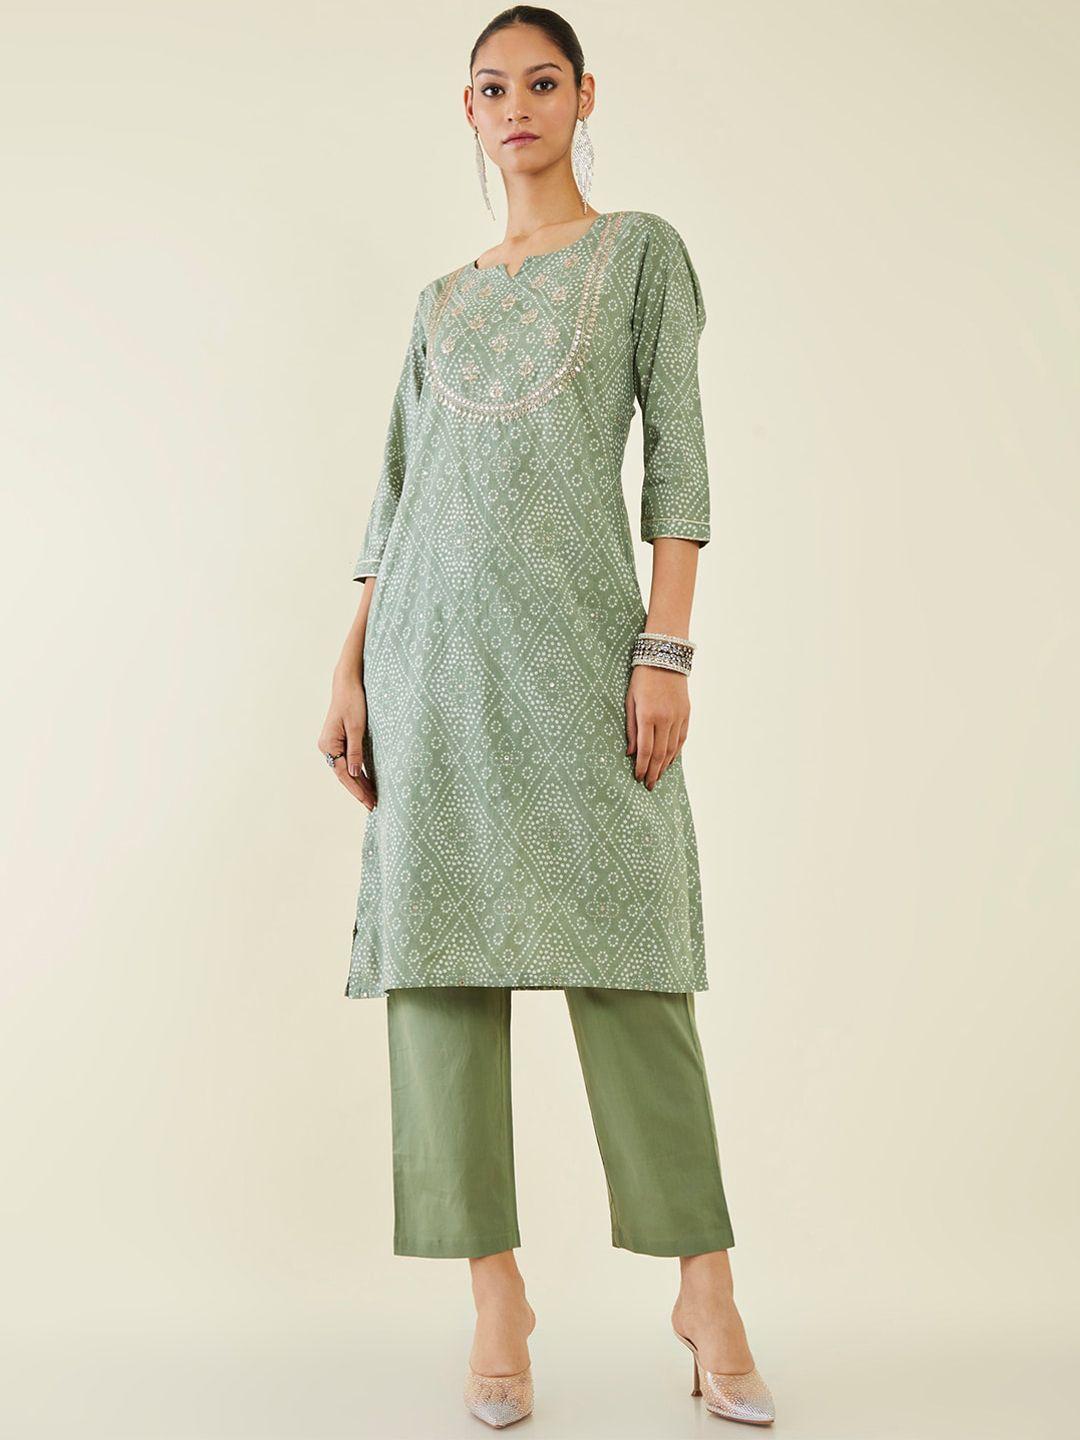 soch bandhani printed thread work pure cotton kurta with trousers